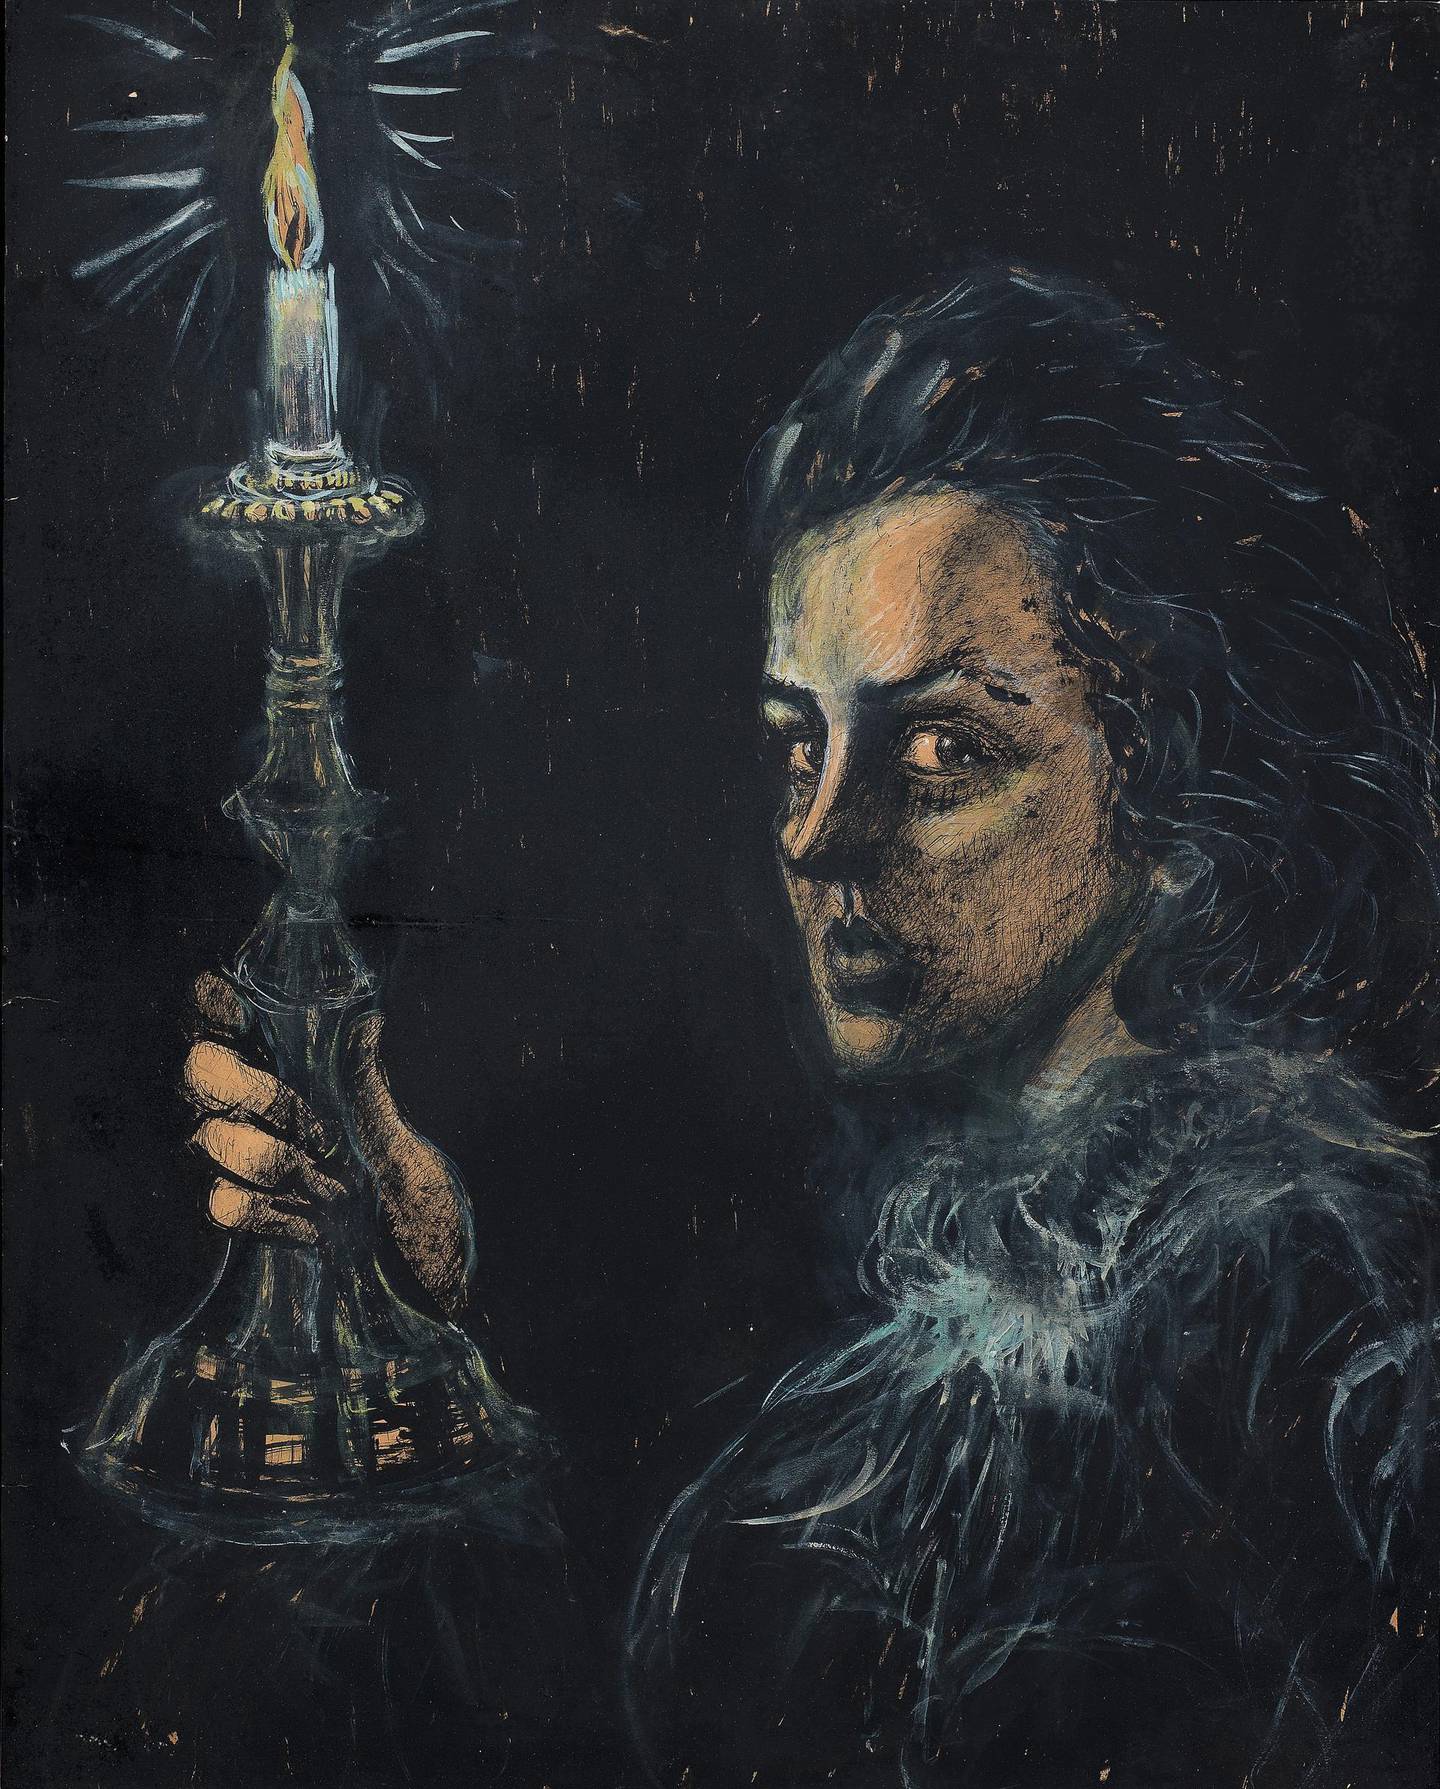 Fahrelnissa Zeid painted this portrait of her daughter as Lady Macbeth in the 1960s. Coutesy Bonhams